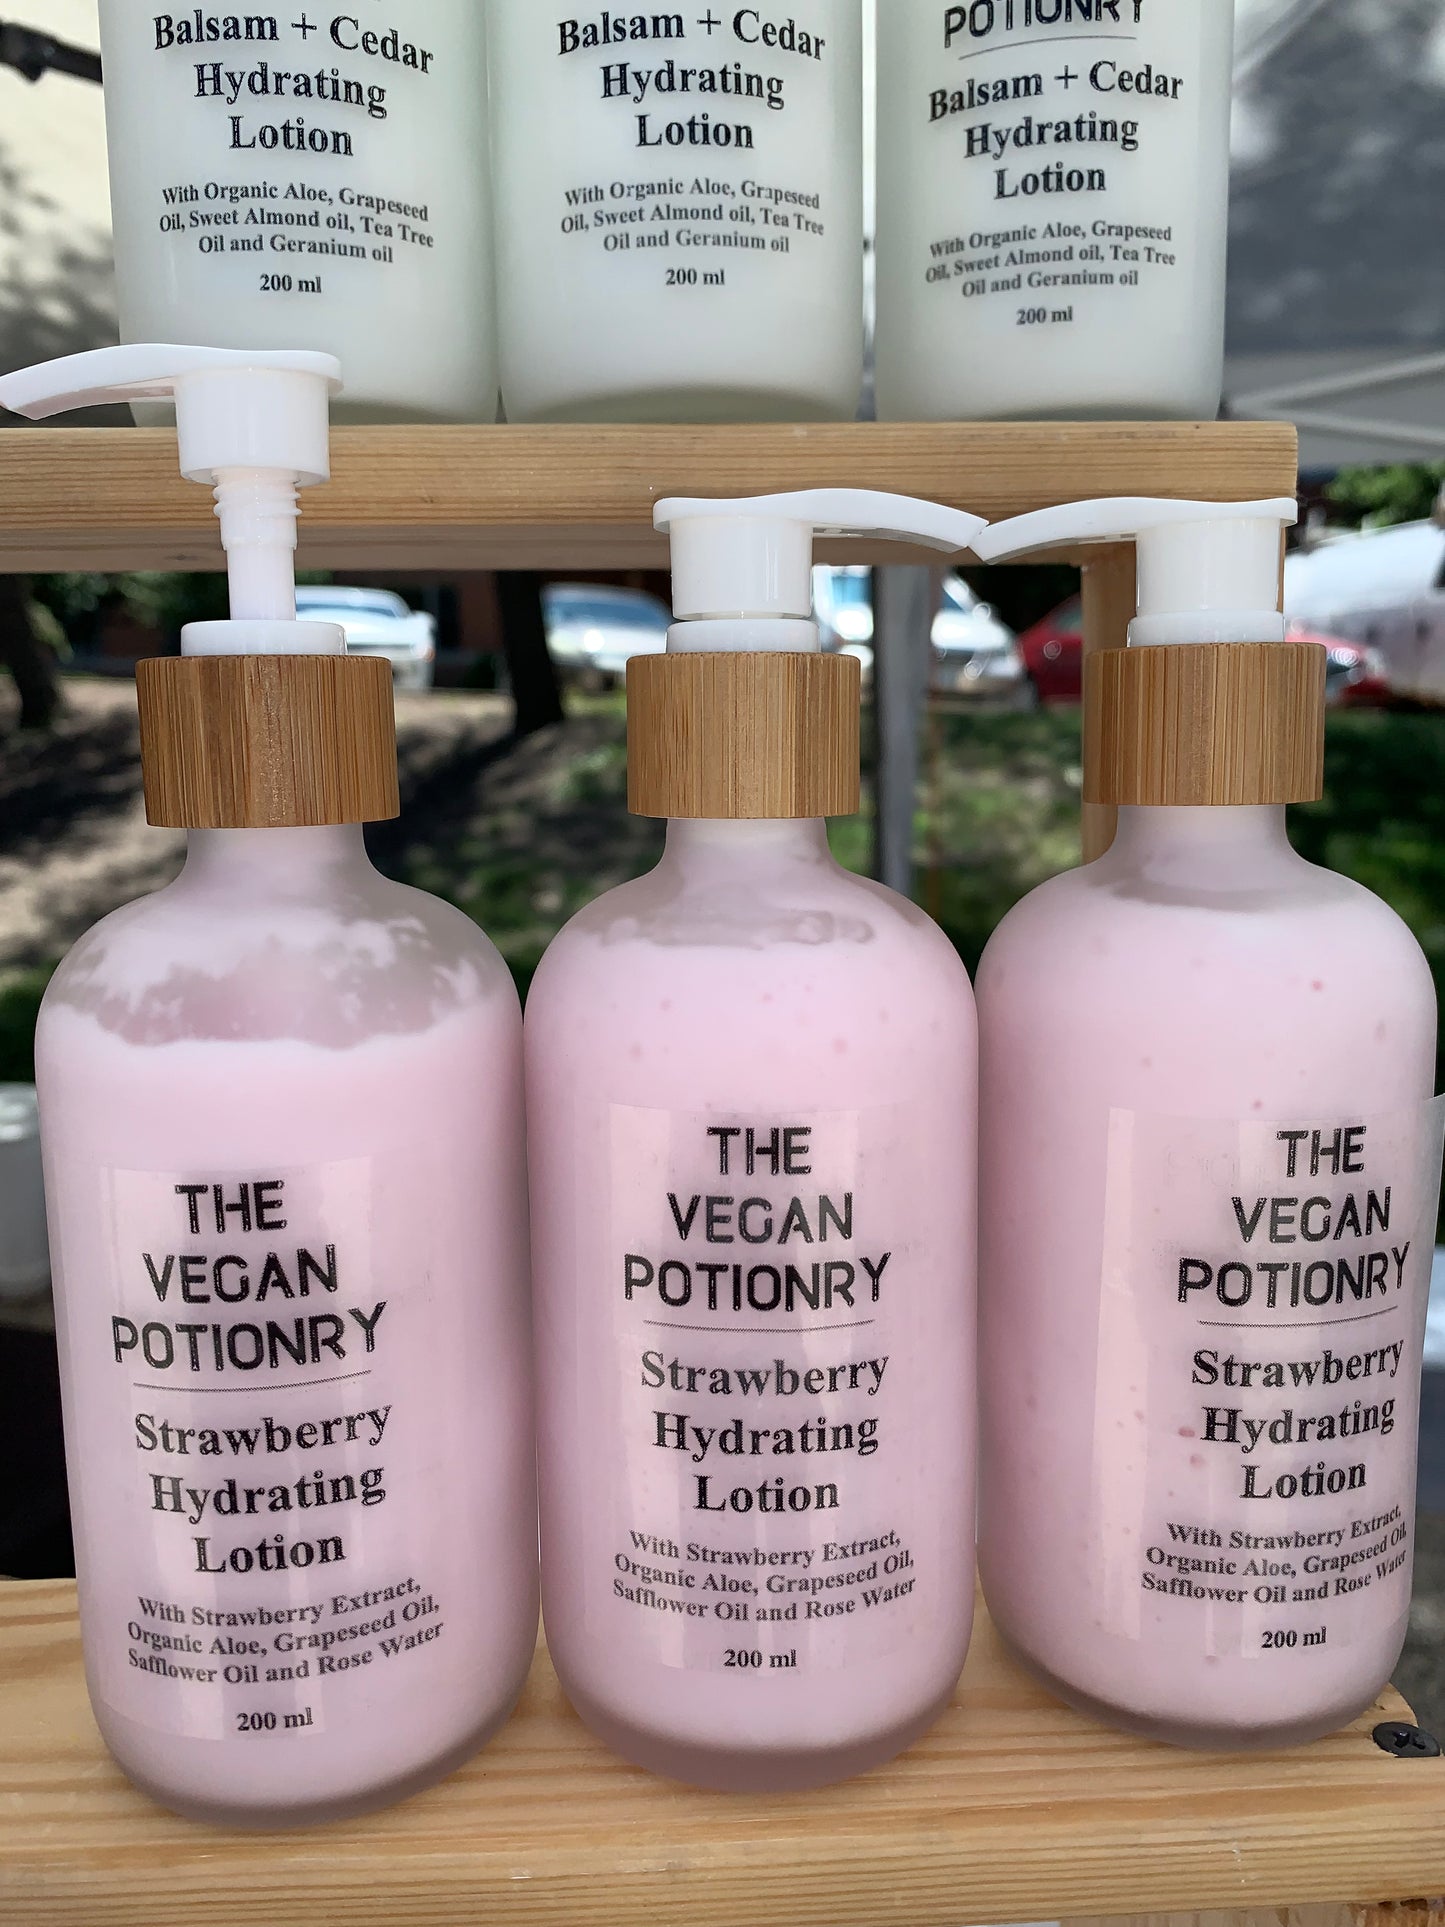 Strawberry Hydrating Lotion